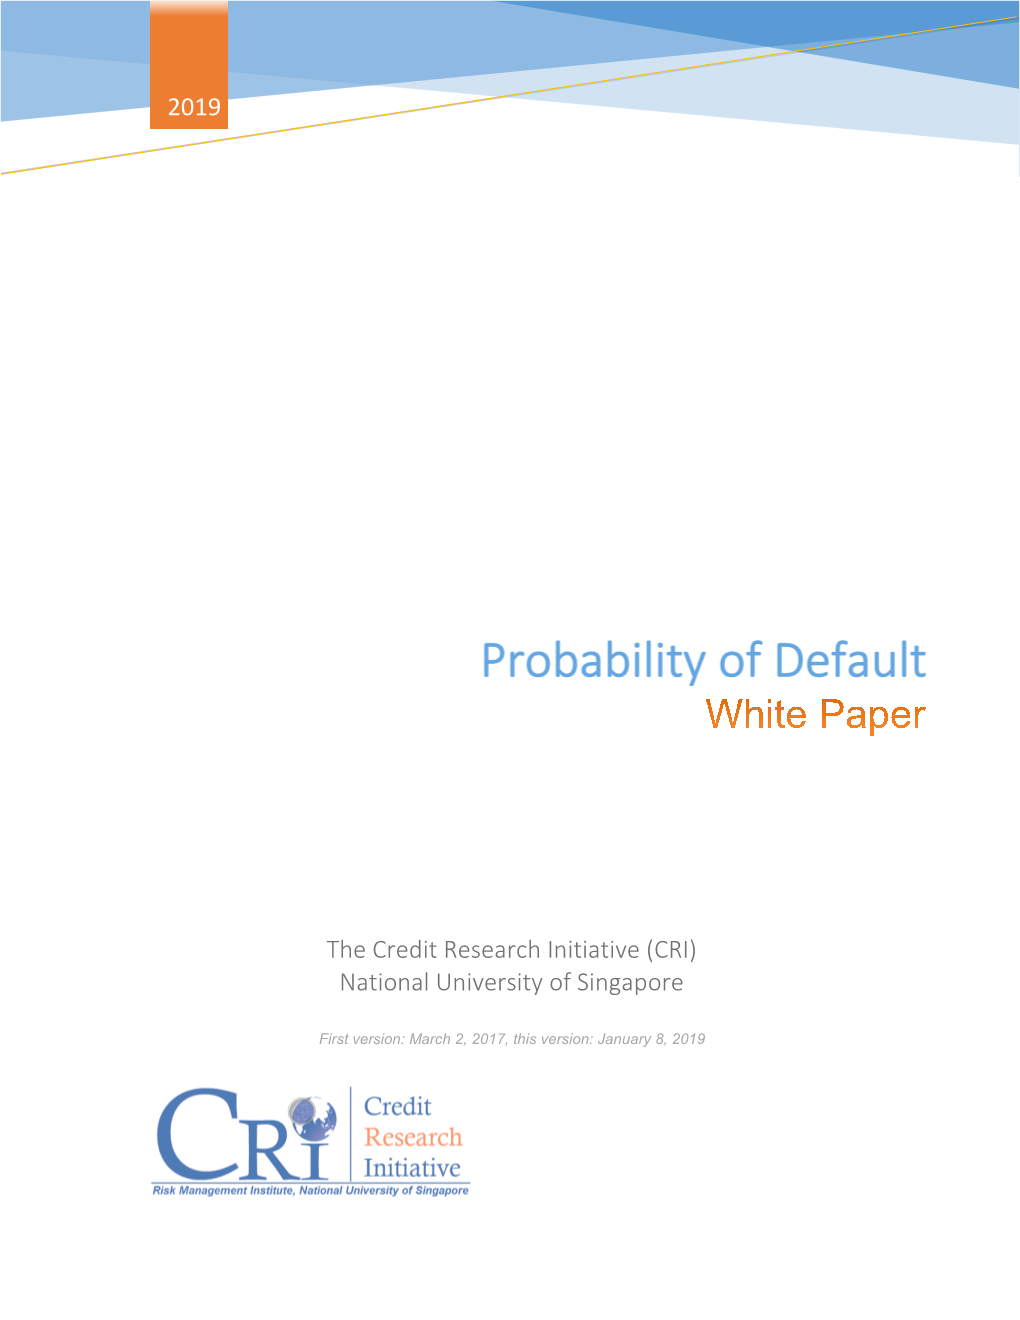 Probability of Default (PD) Is the Core Credit Product of the Credit Research Initiative (CRI)